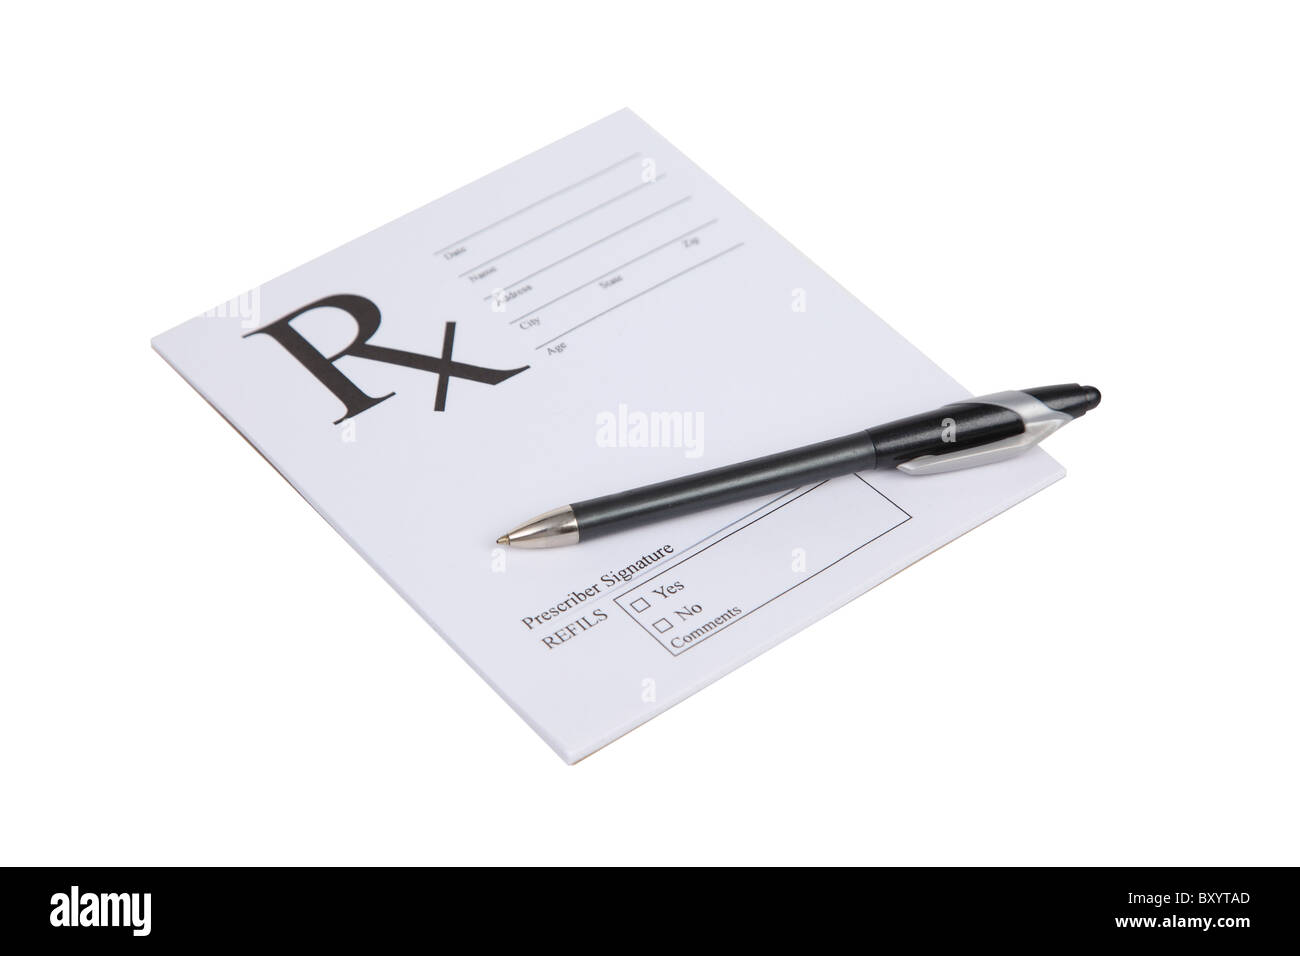 Prescription tablet and pen on white background Stock Photo